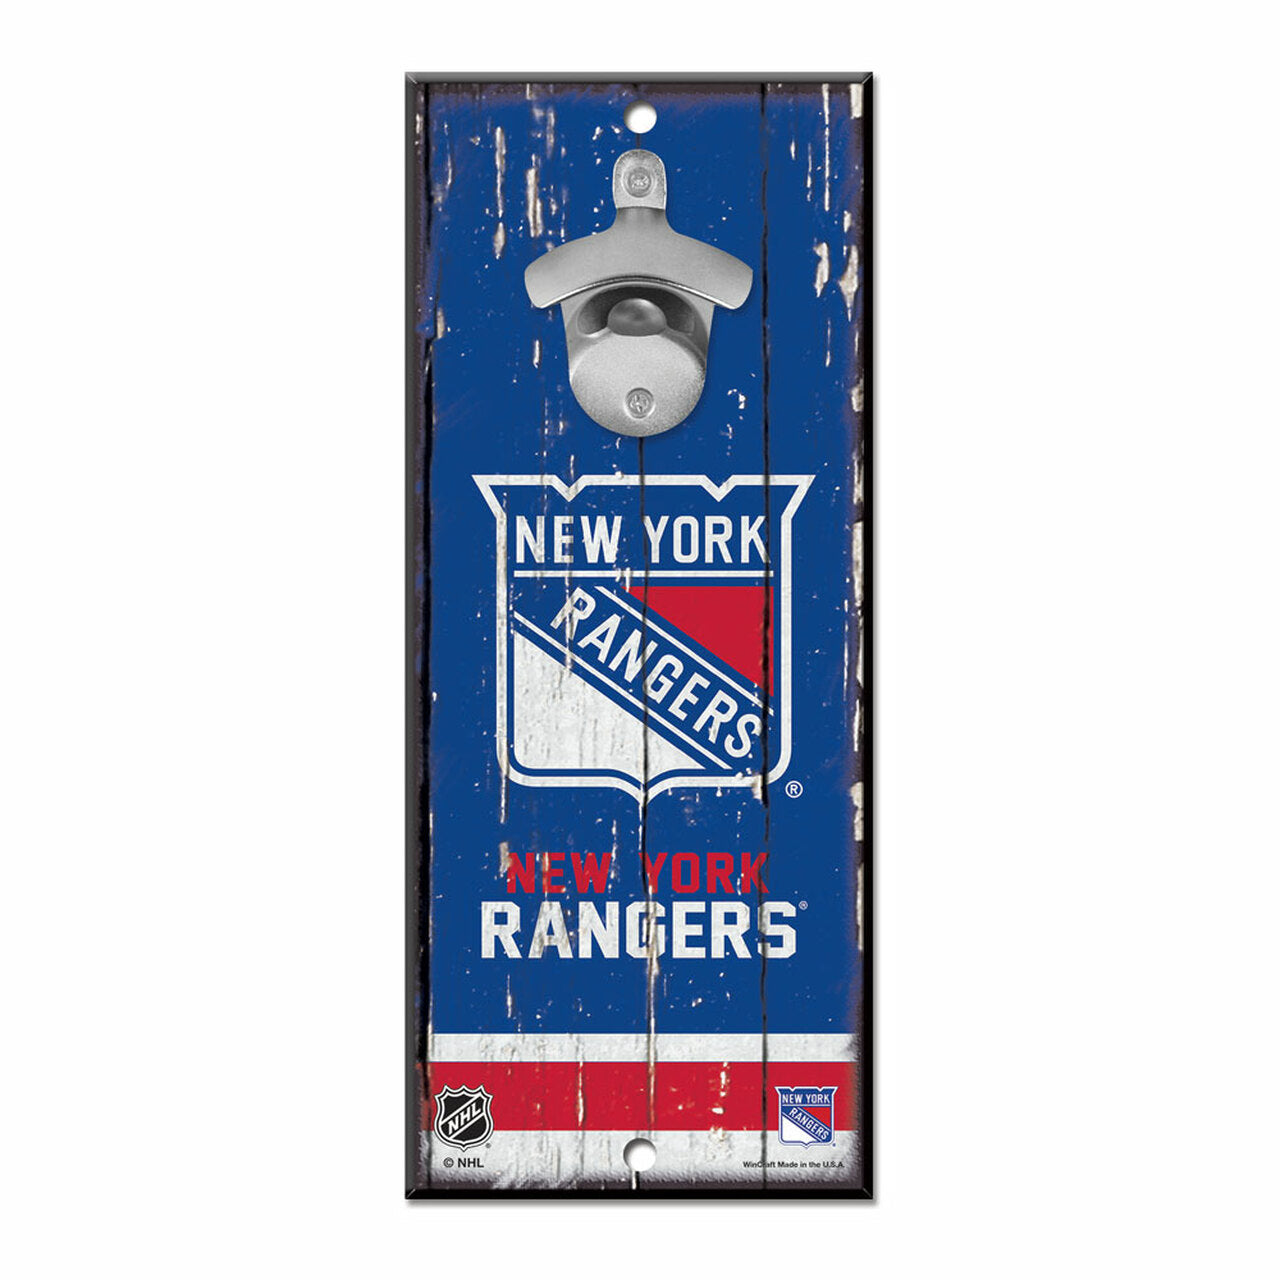 New York Rangers 5" x 11" Bottle Opener Wood Sign by Wincraft